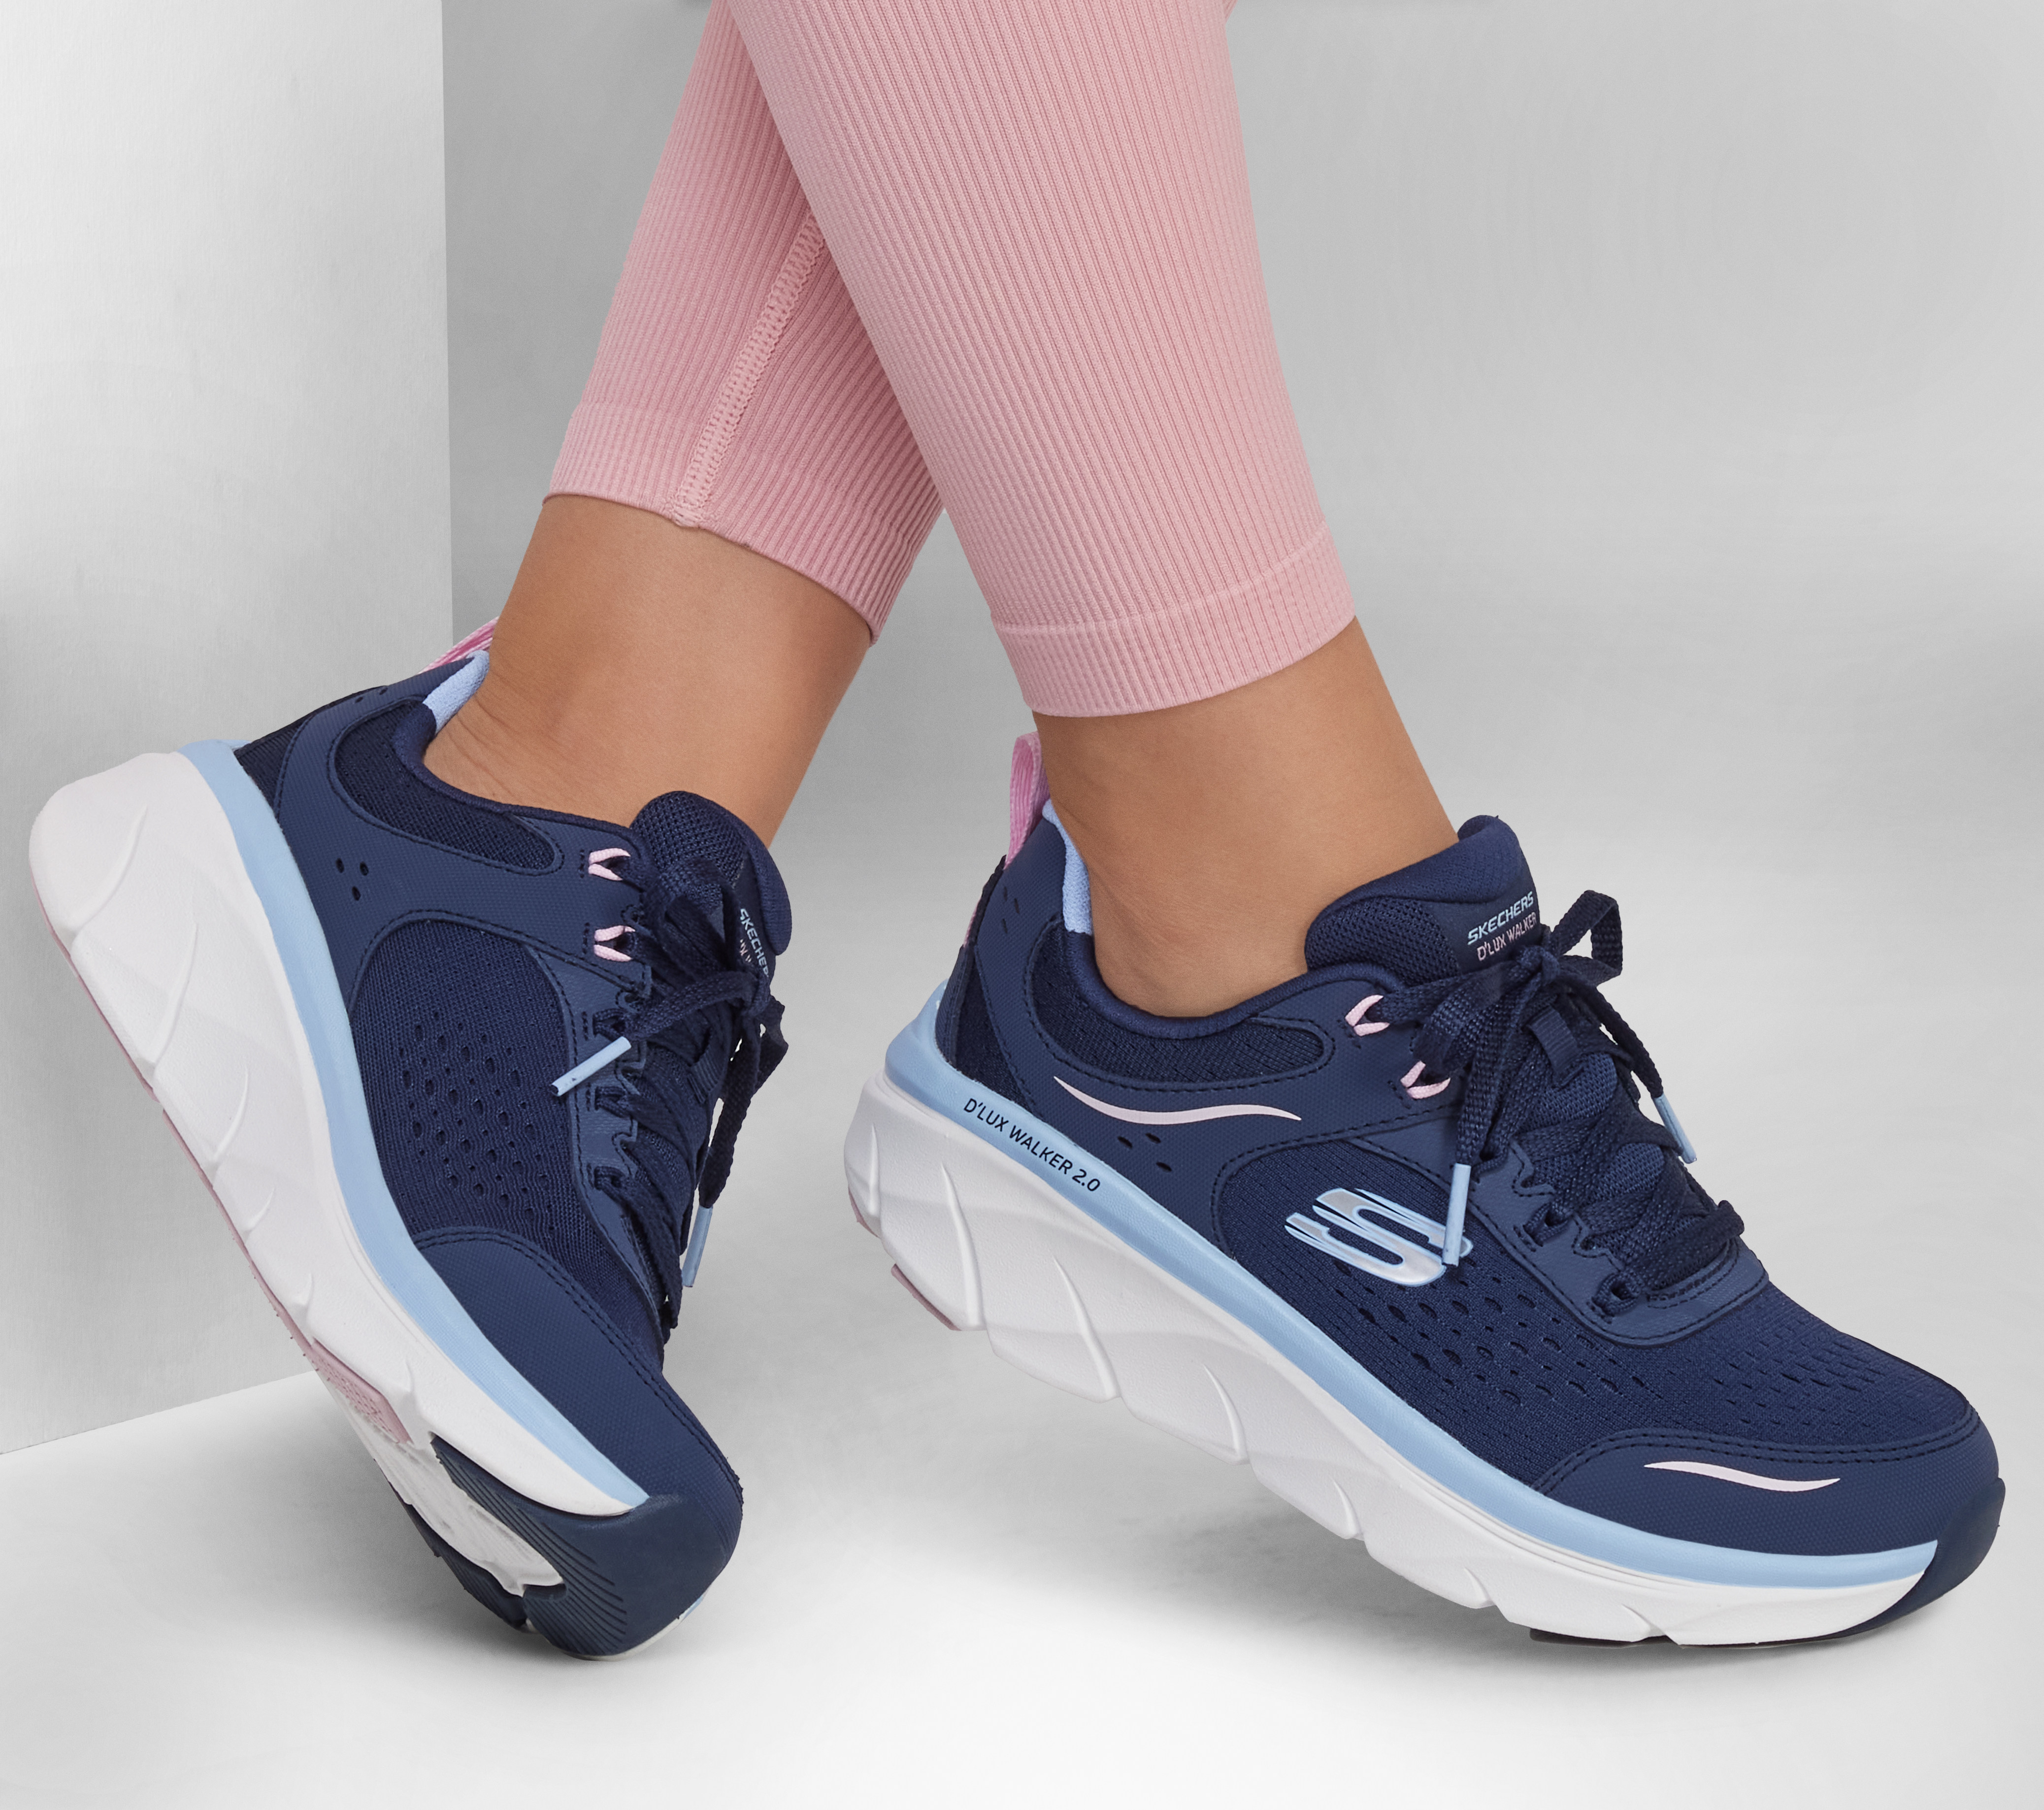 Skechers Women's Relaxed Fit: D'Lux Walker 2.0 - Daisy Doll Sneaker Size 10.0 Navy/Pink Leather/Textile/Synthetic